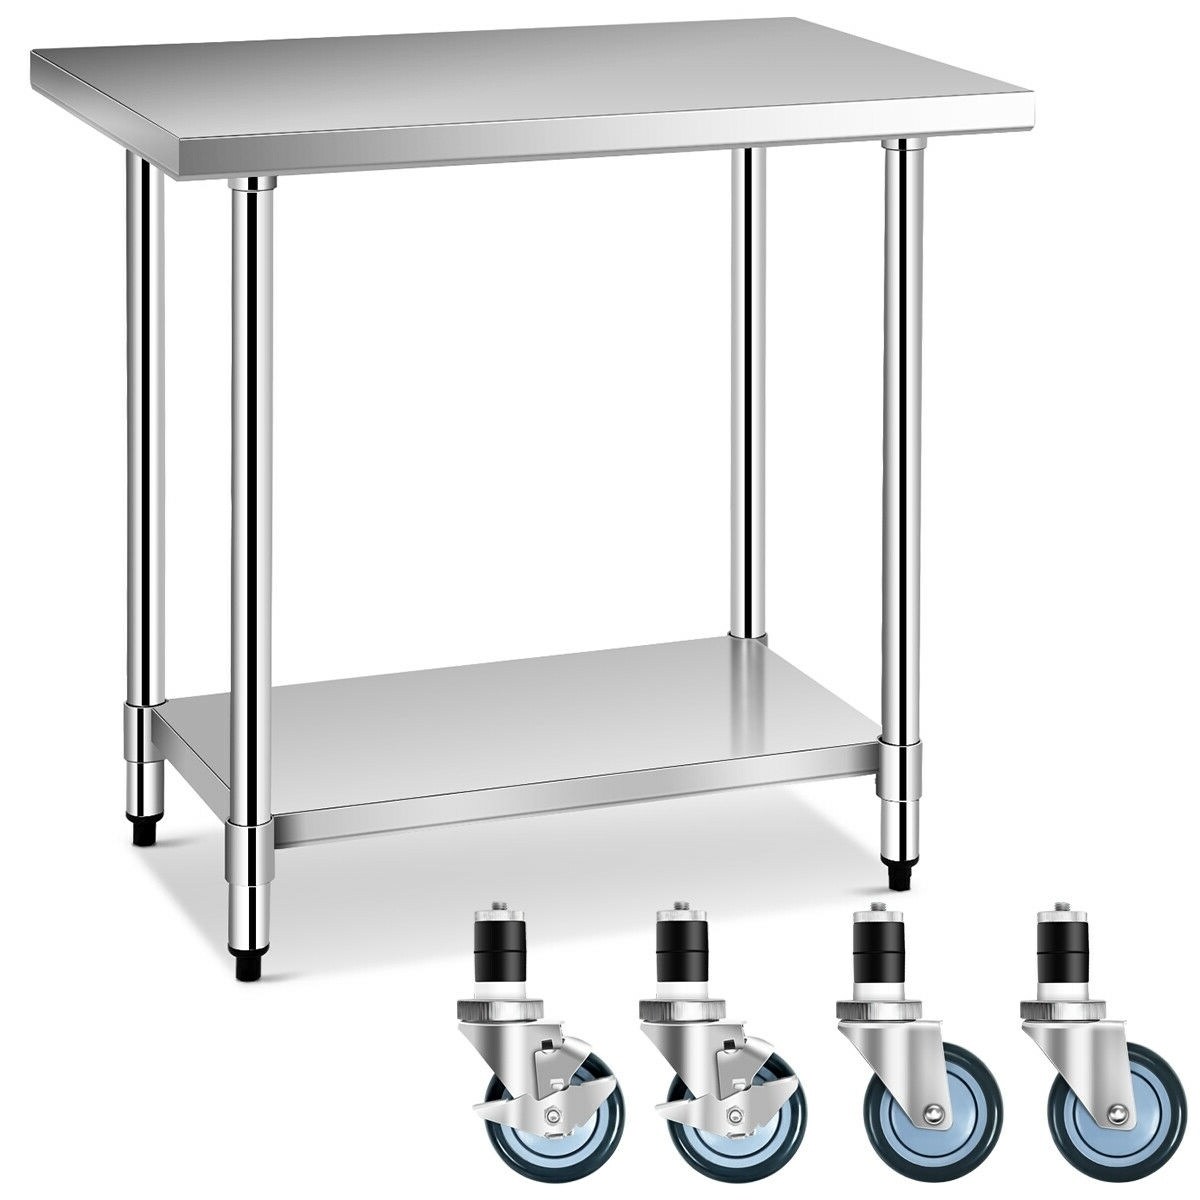 Gymax 24 x 36 Stainless Steel Commercial Kitchen Work Table w/ 4 Wheels